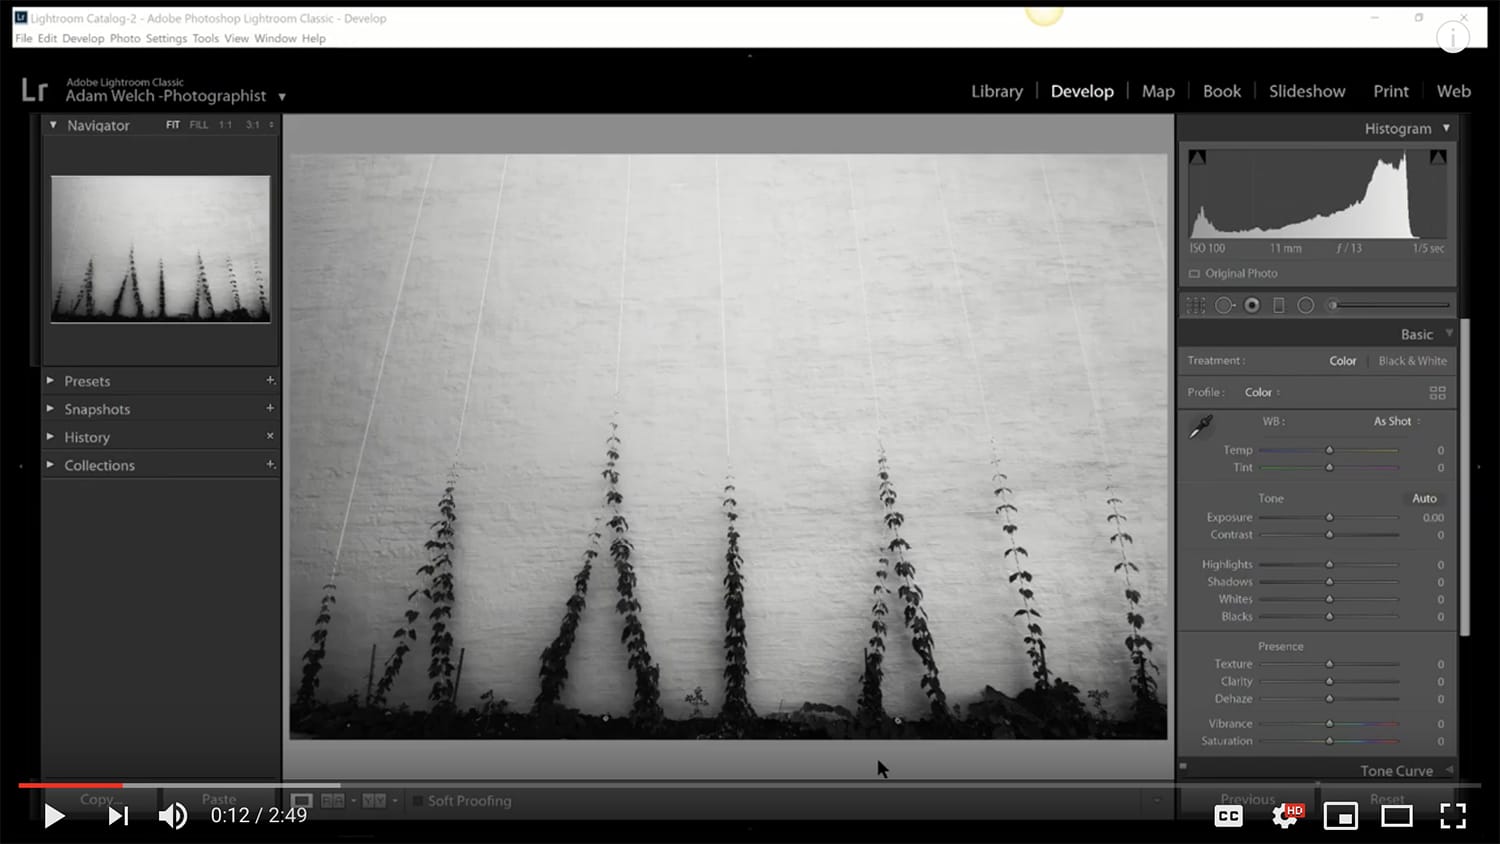 Introduction to the Texture Slider in Lightroom Classic - Video